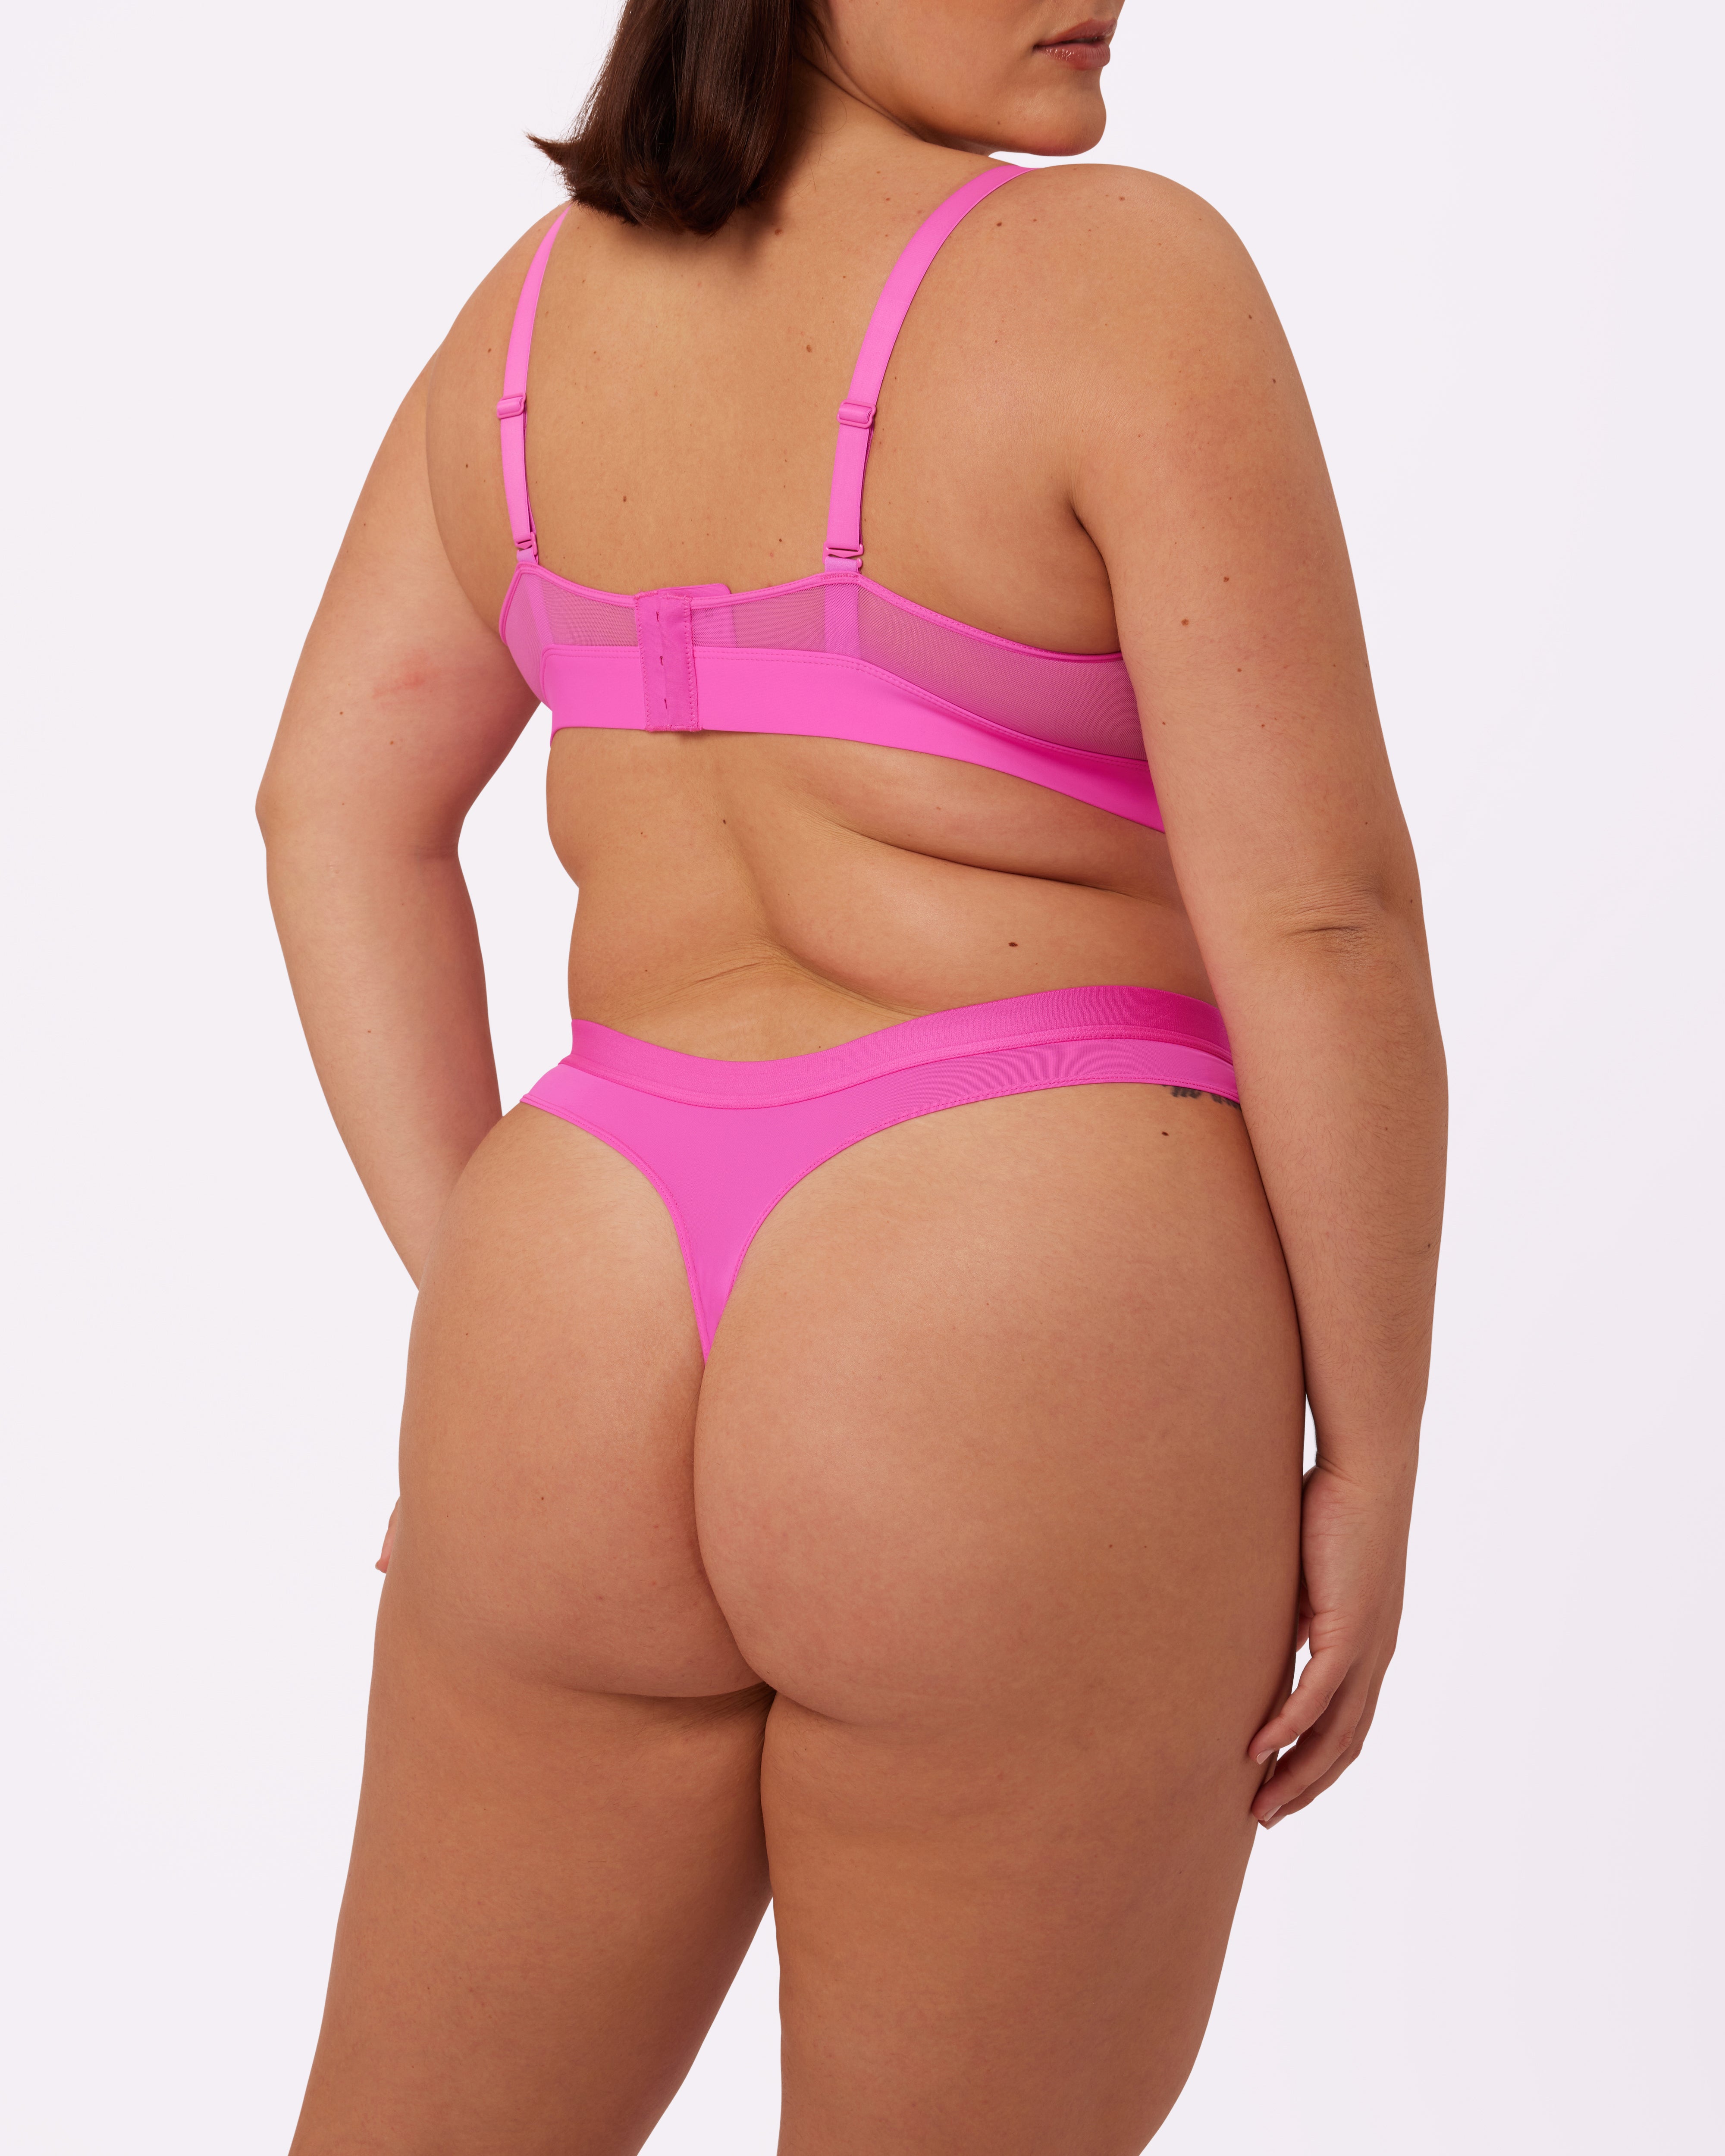 The Thong | Women's Underwear | Starting at $9 | Parade